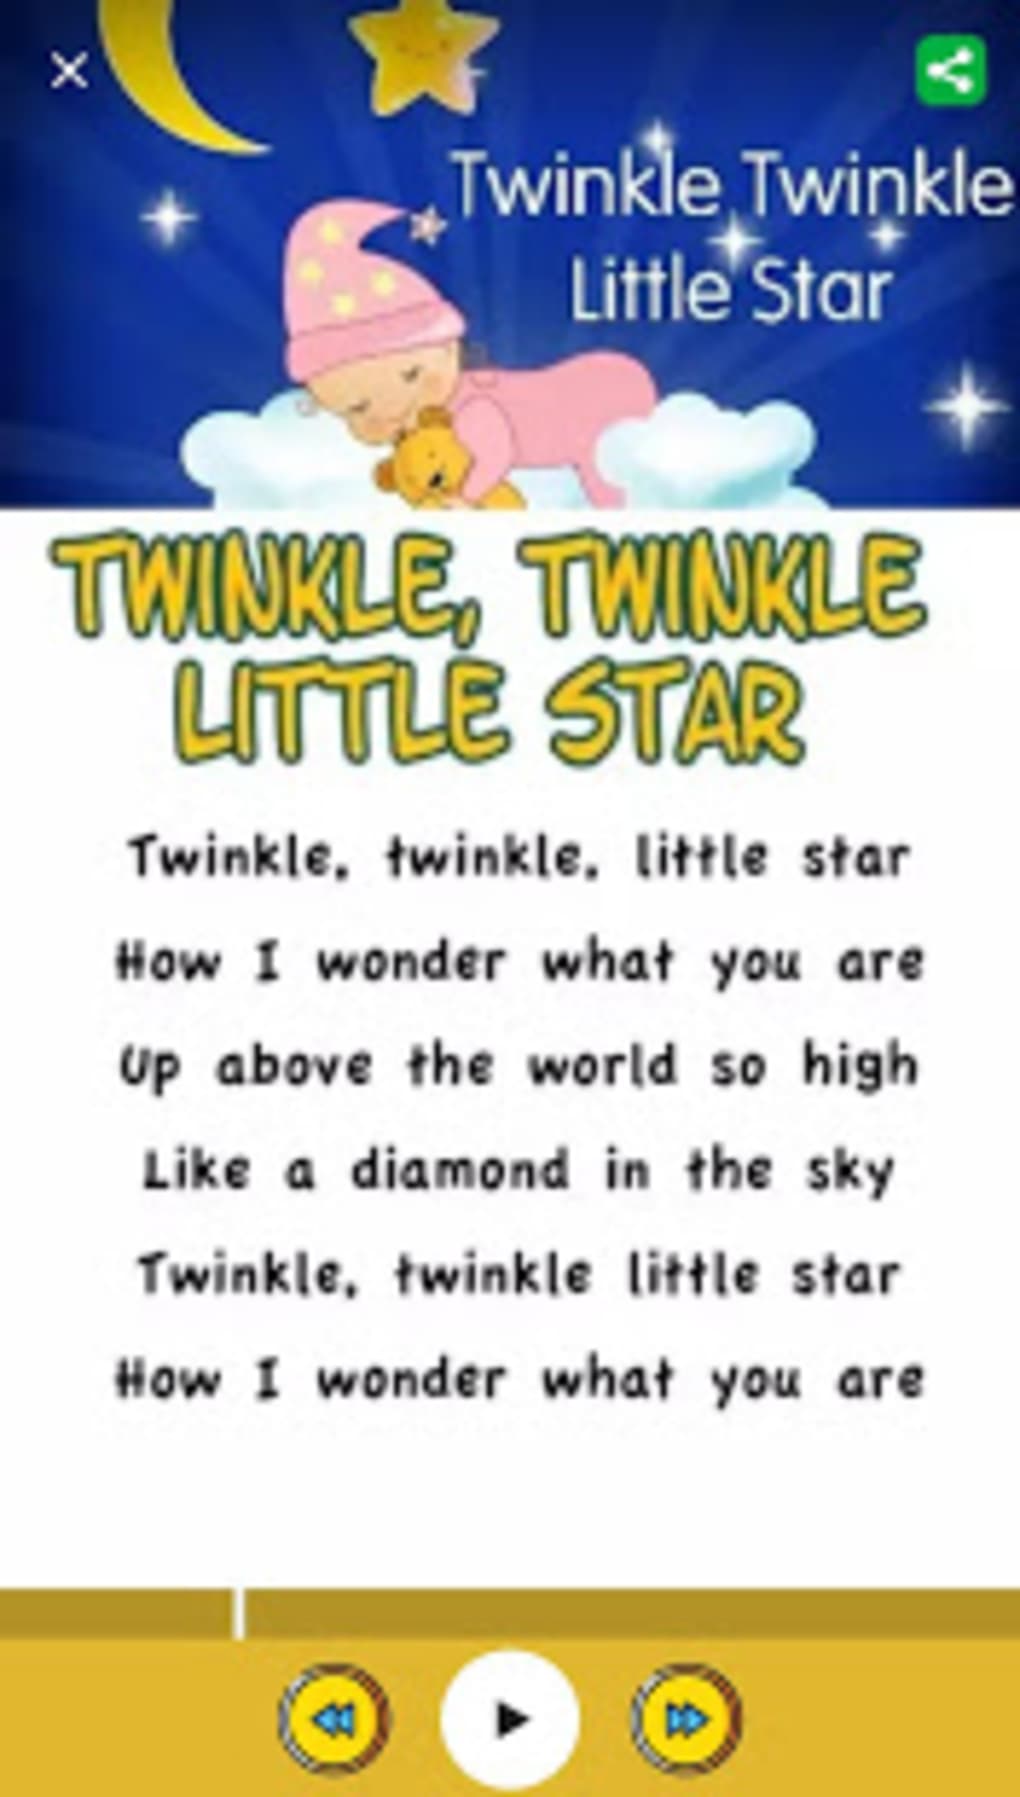 Nursery Rhymes Baby Songs Free APK for Android   Download